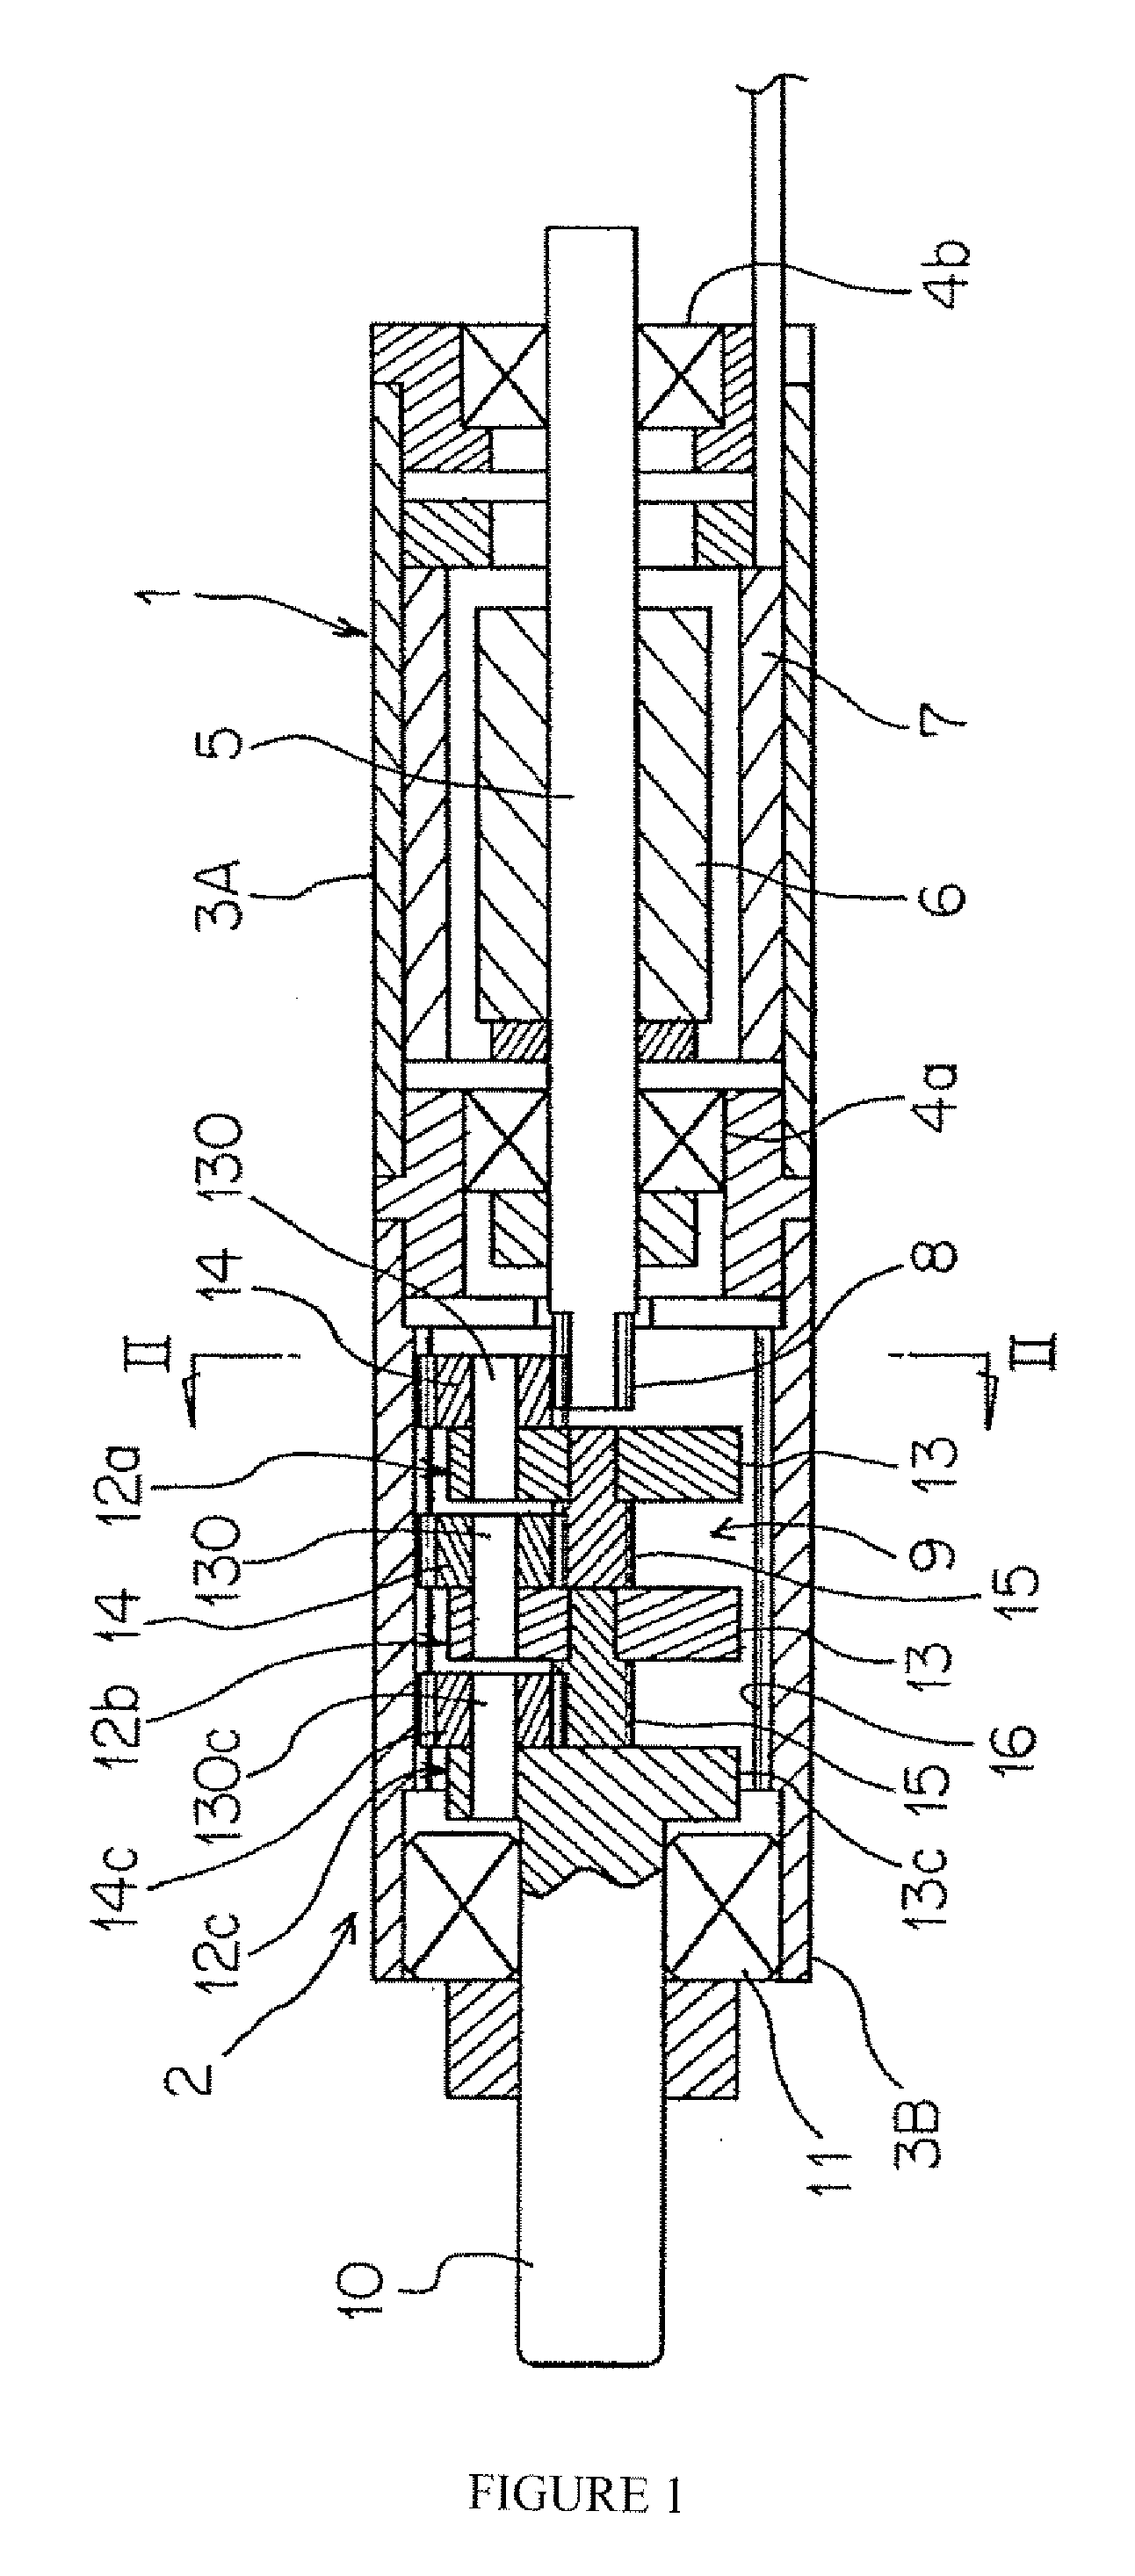 Motor shaft for micromotor, and micromotor